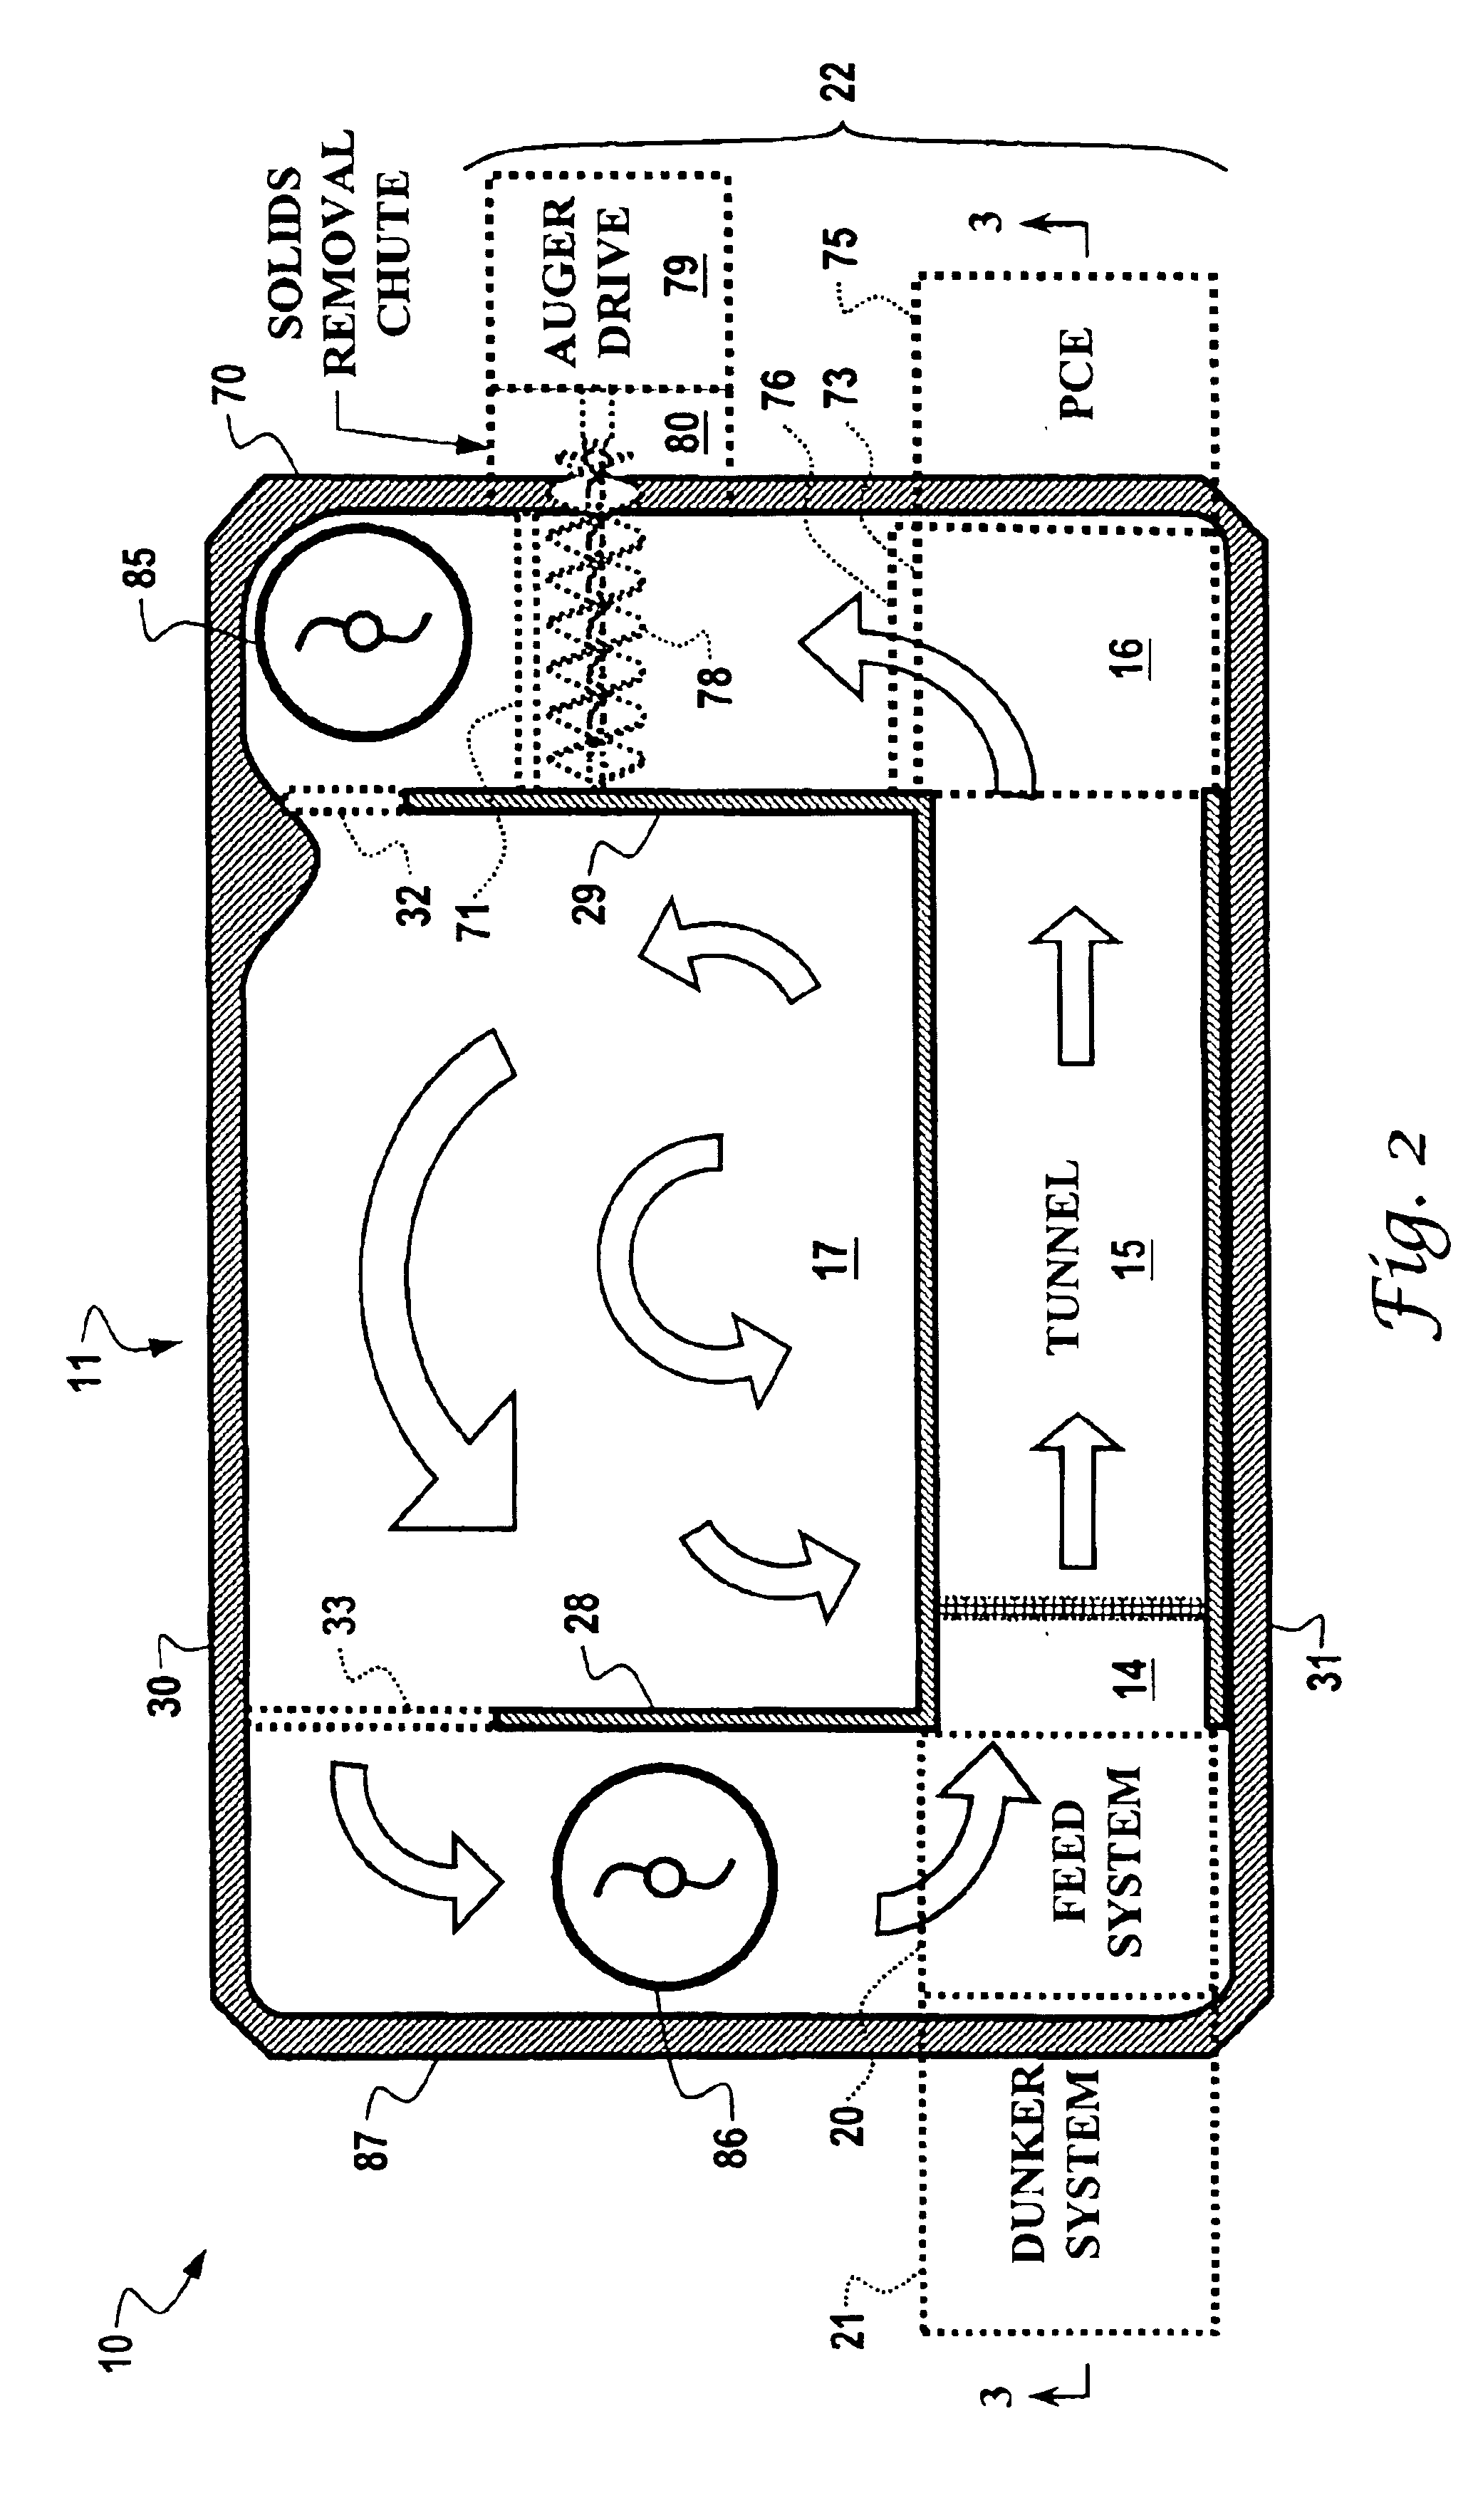 Apparatus and method for treating containerized feed materials in a liquid reactant metal